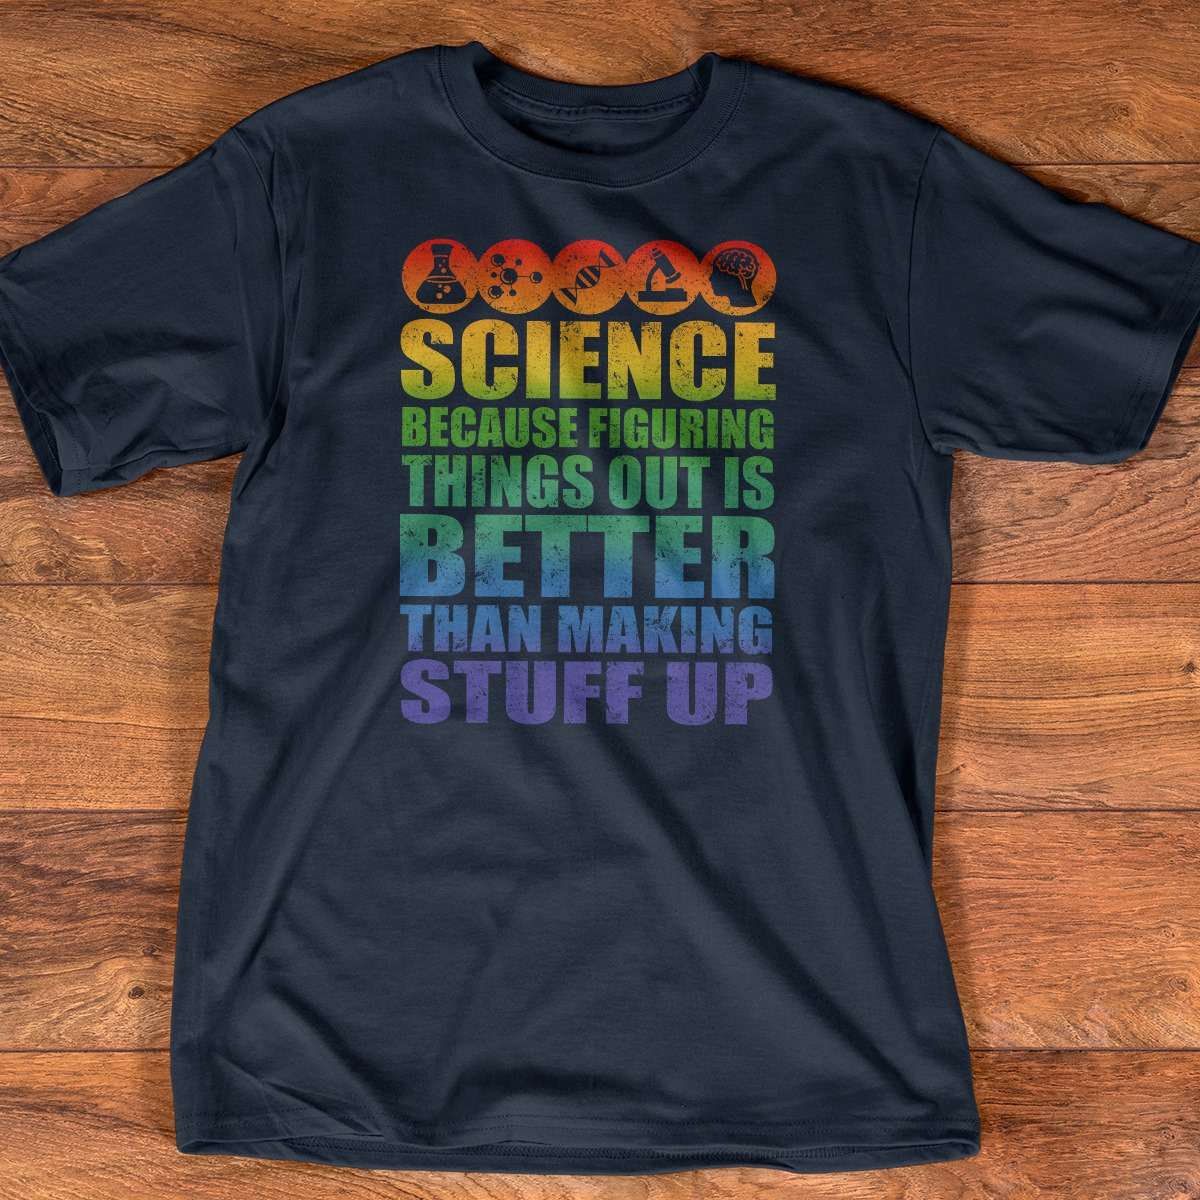 Science because figuring things out is better than making stuff up - Science knowlegde